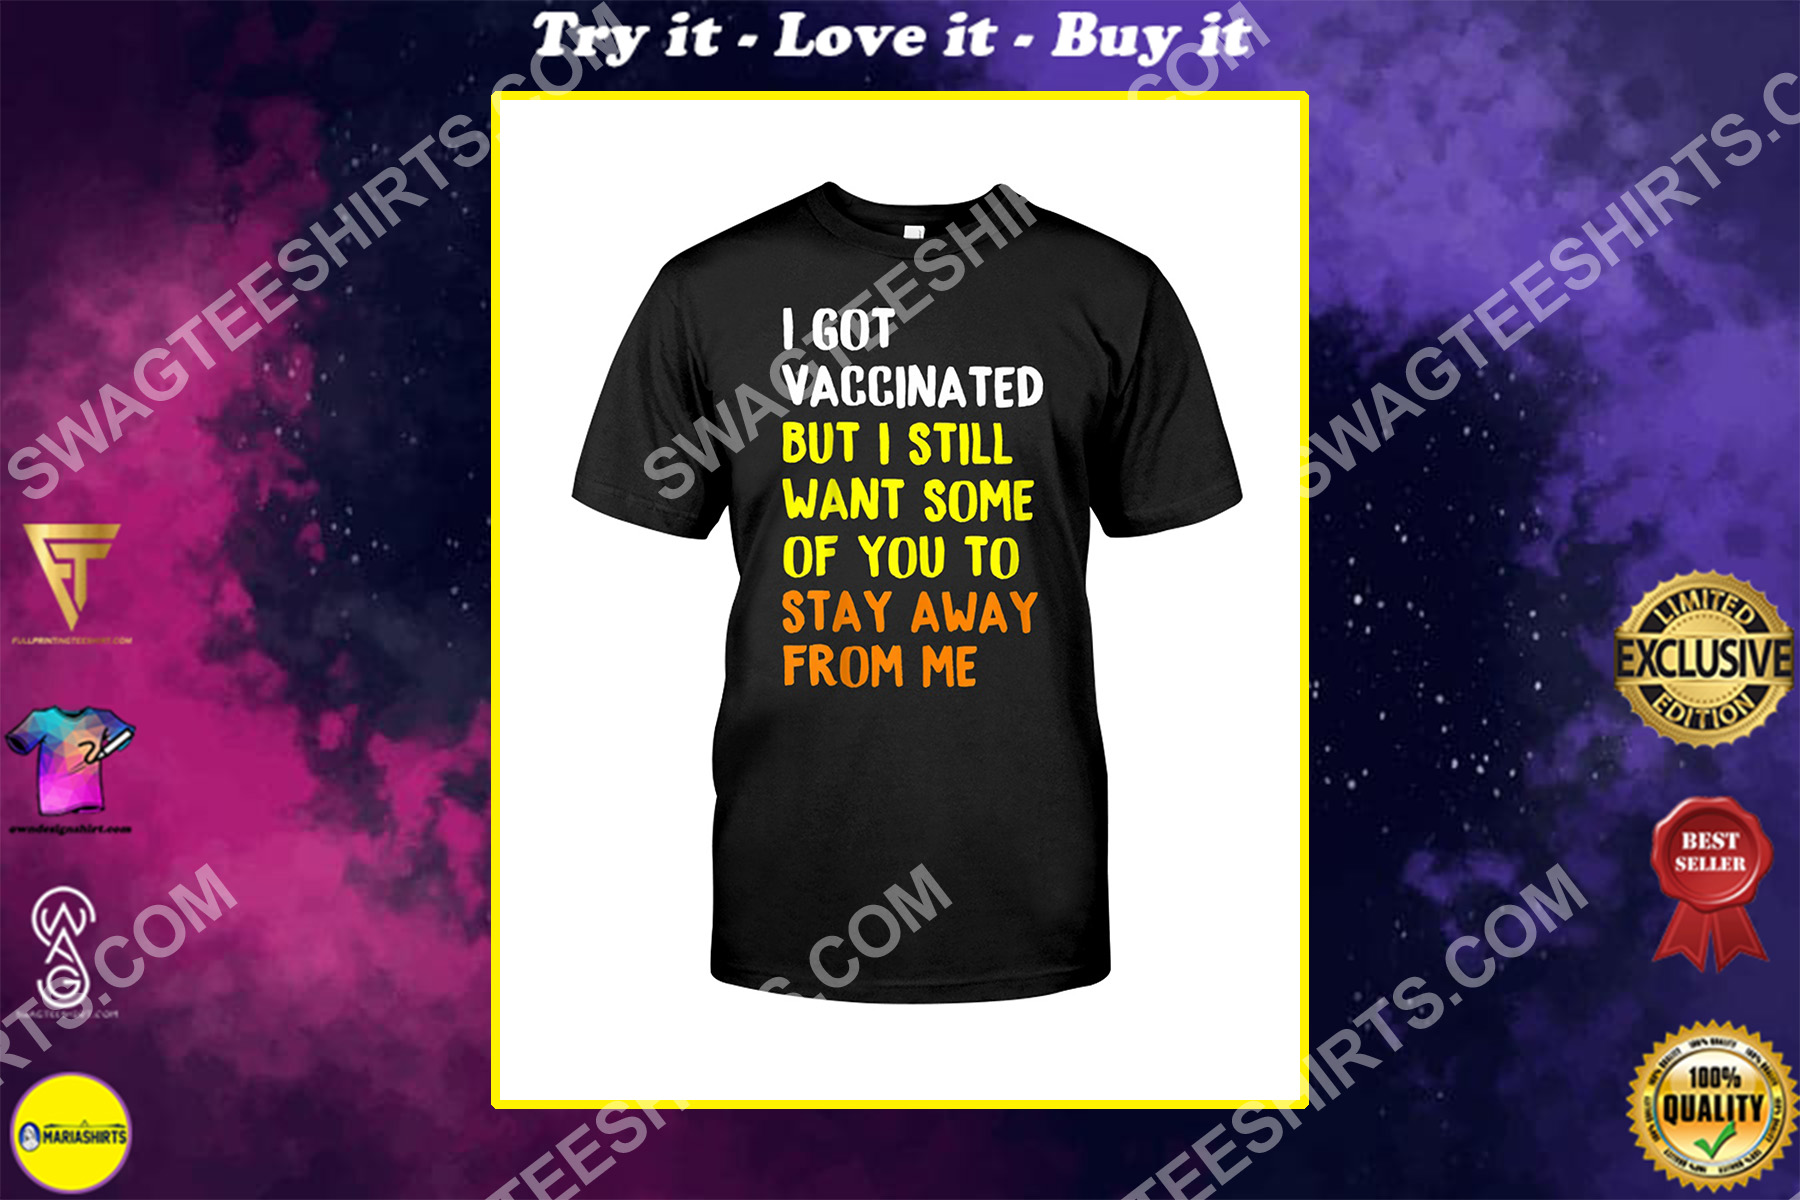 I Got Vaccinated But I Still Want Some of You To Stay Away From Me Shirt